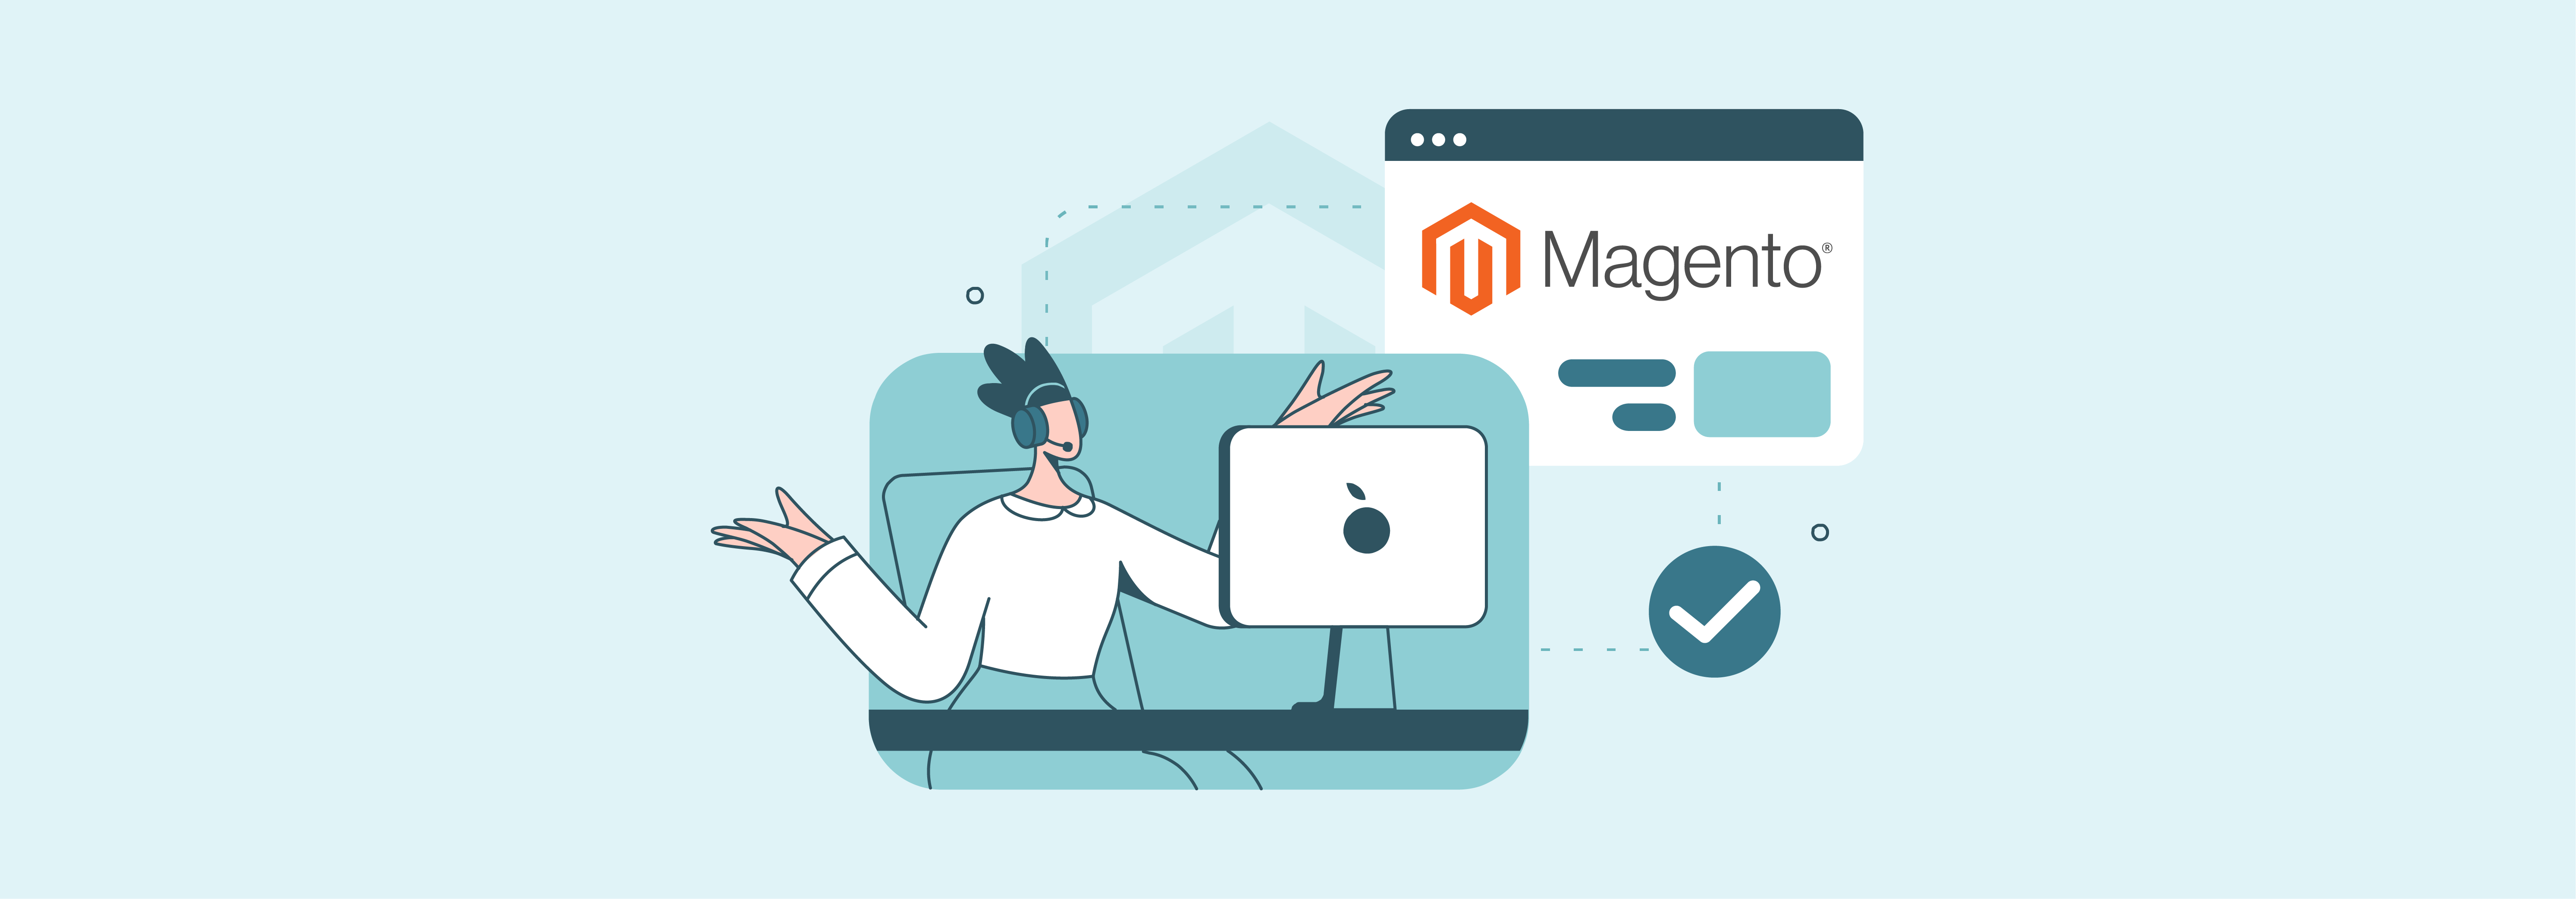 Dedicated Magento support ensuring optimal eCommerce performance